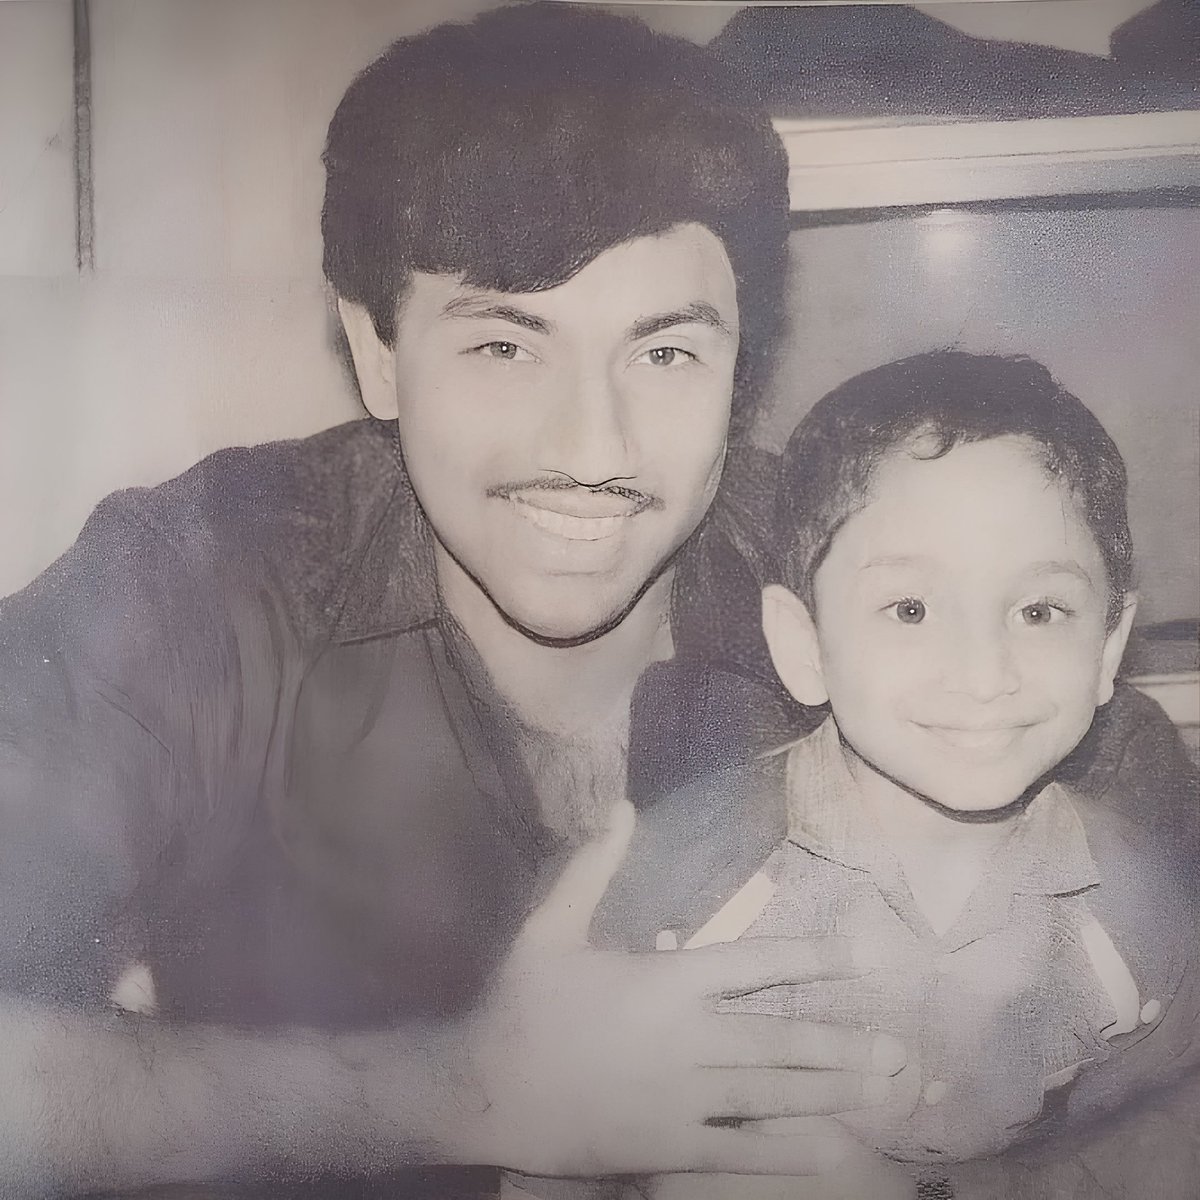 Sathyaraj and Fahadh Faasil in the 1980s.